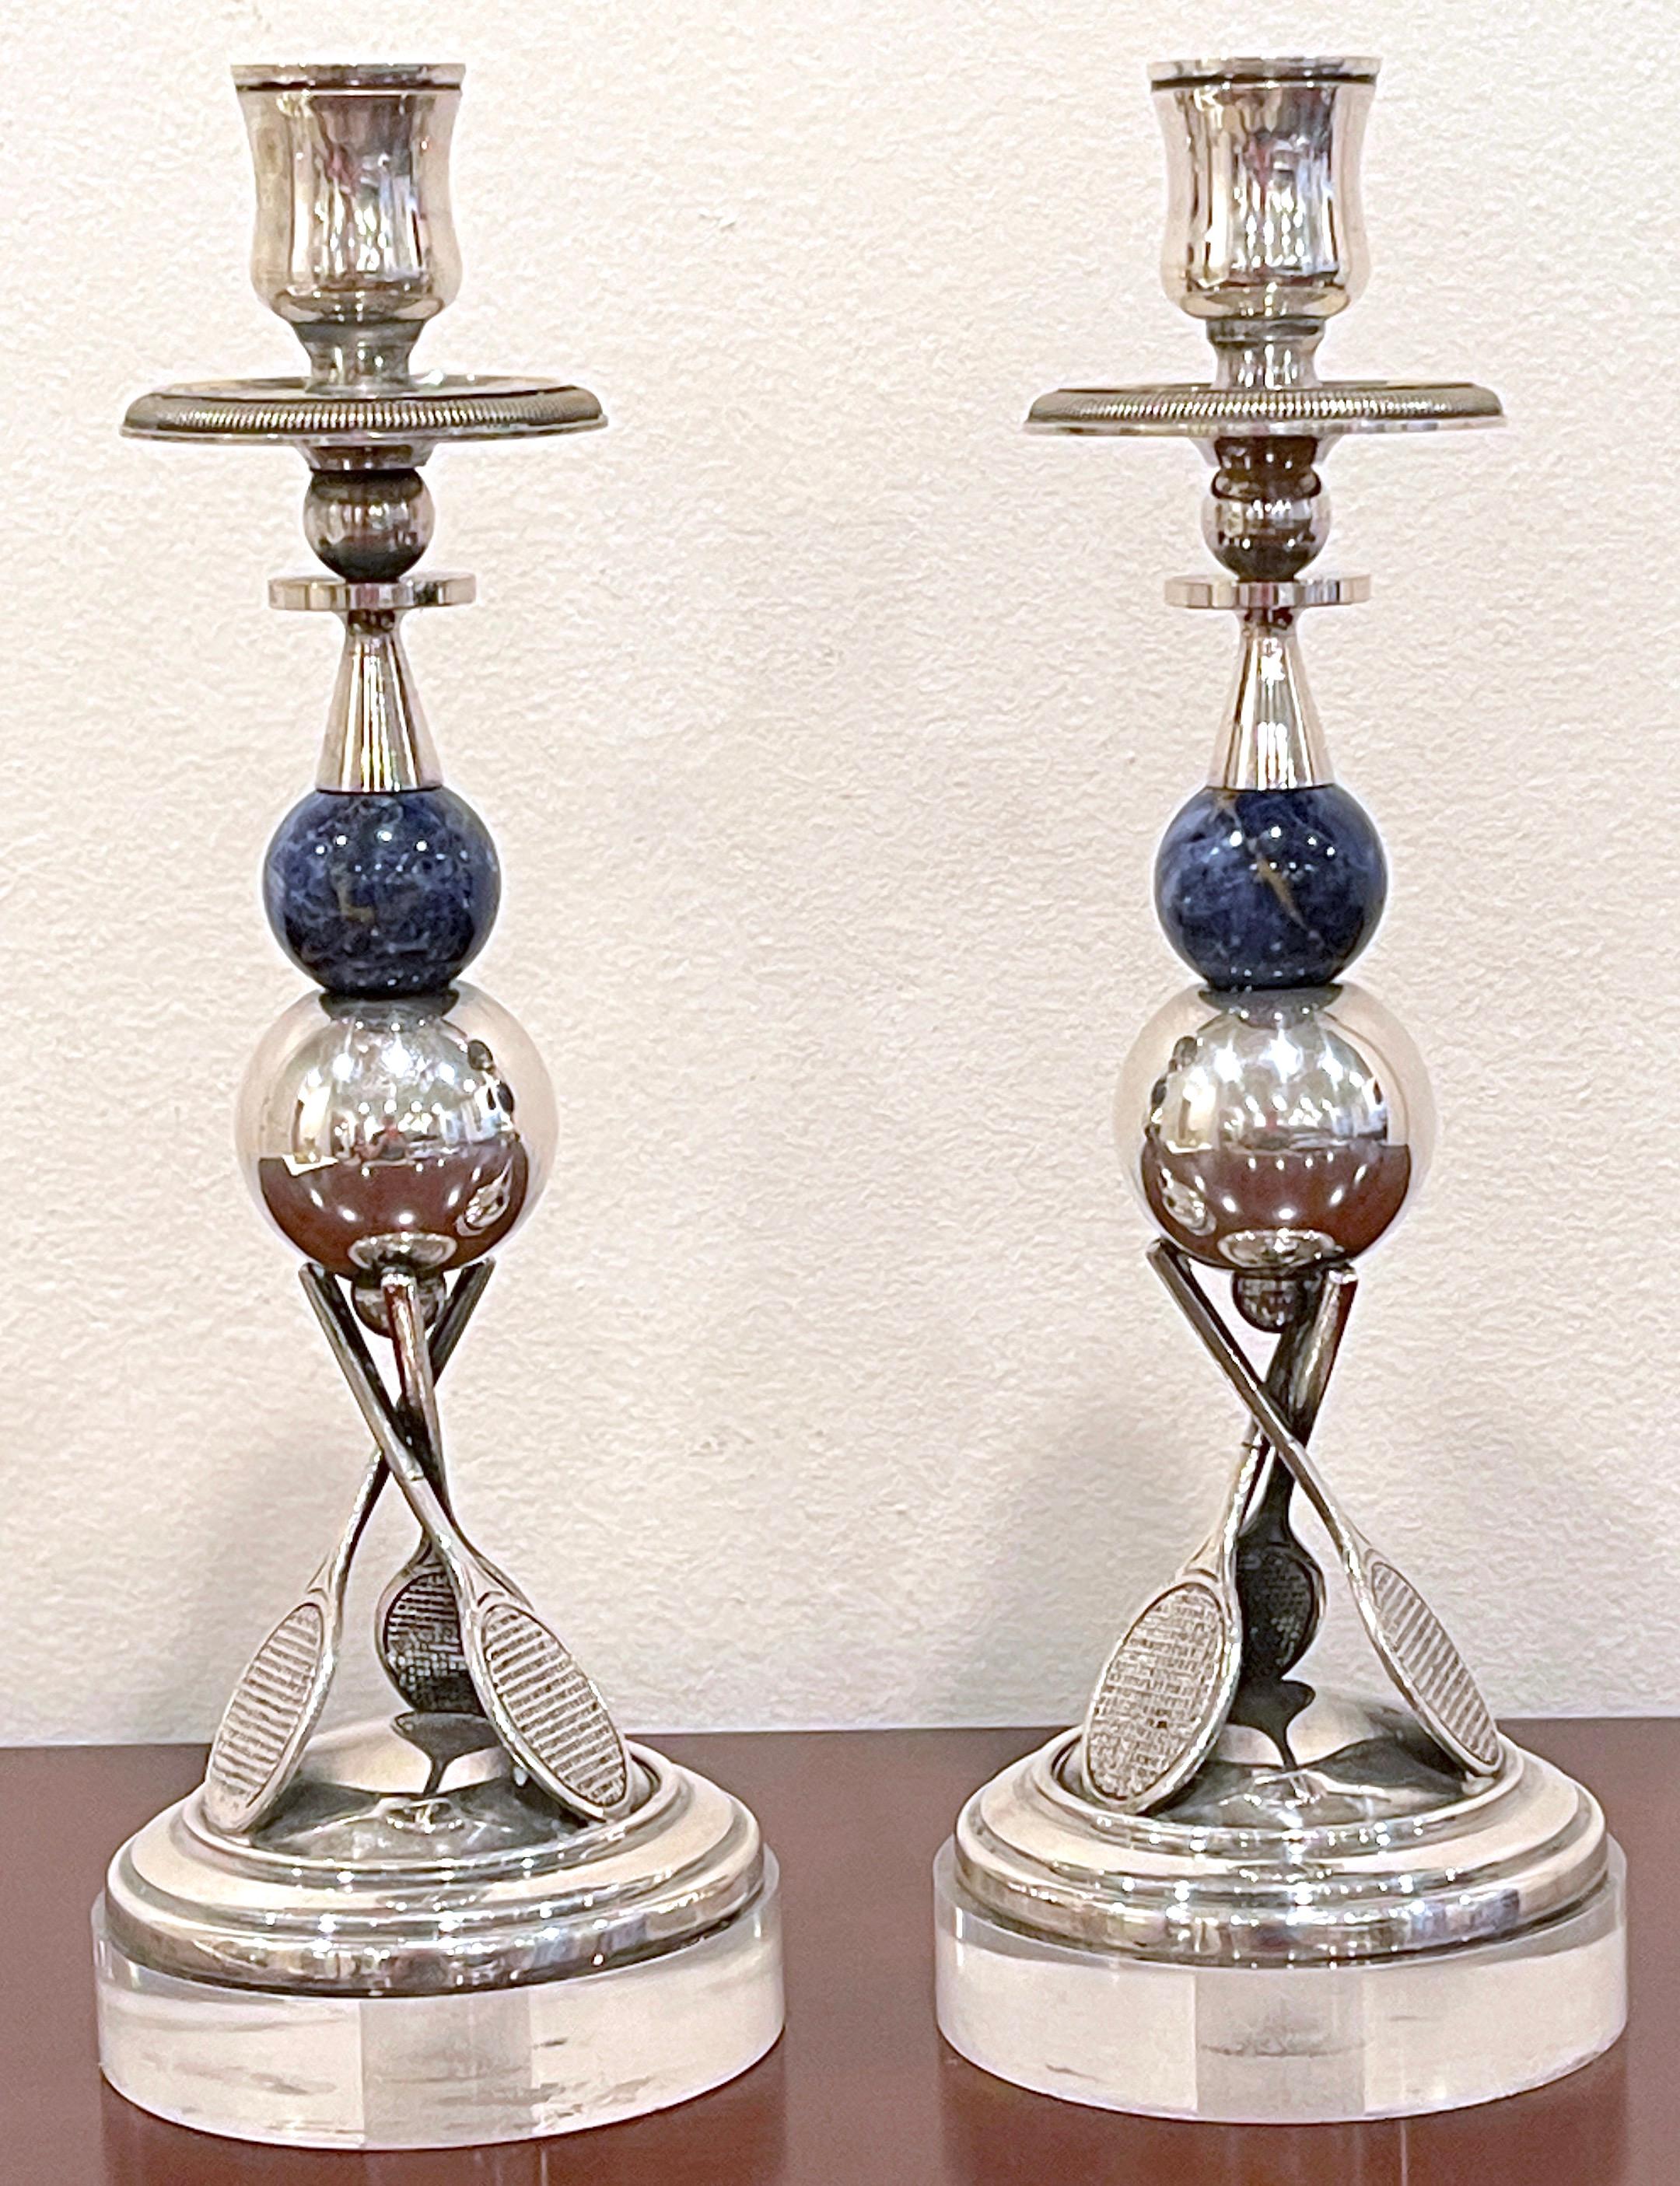 A Pair of Italian Silver-Plated, Lapis & Lucite Tennis motif candlesticks 
Italy, circa 1970s
A whimsical pair of Silver-plated Candlesticks, the design, reminiscent of Gucci and Buccellati works. 
Each candlestick fitted with a single bobeche,